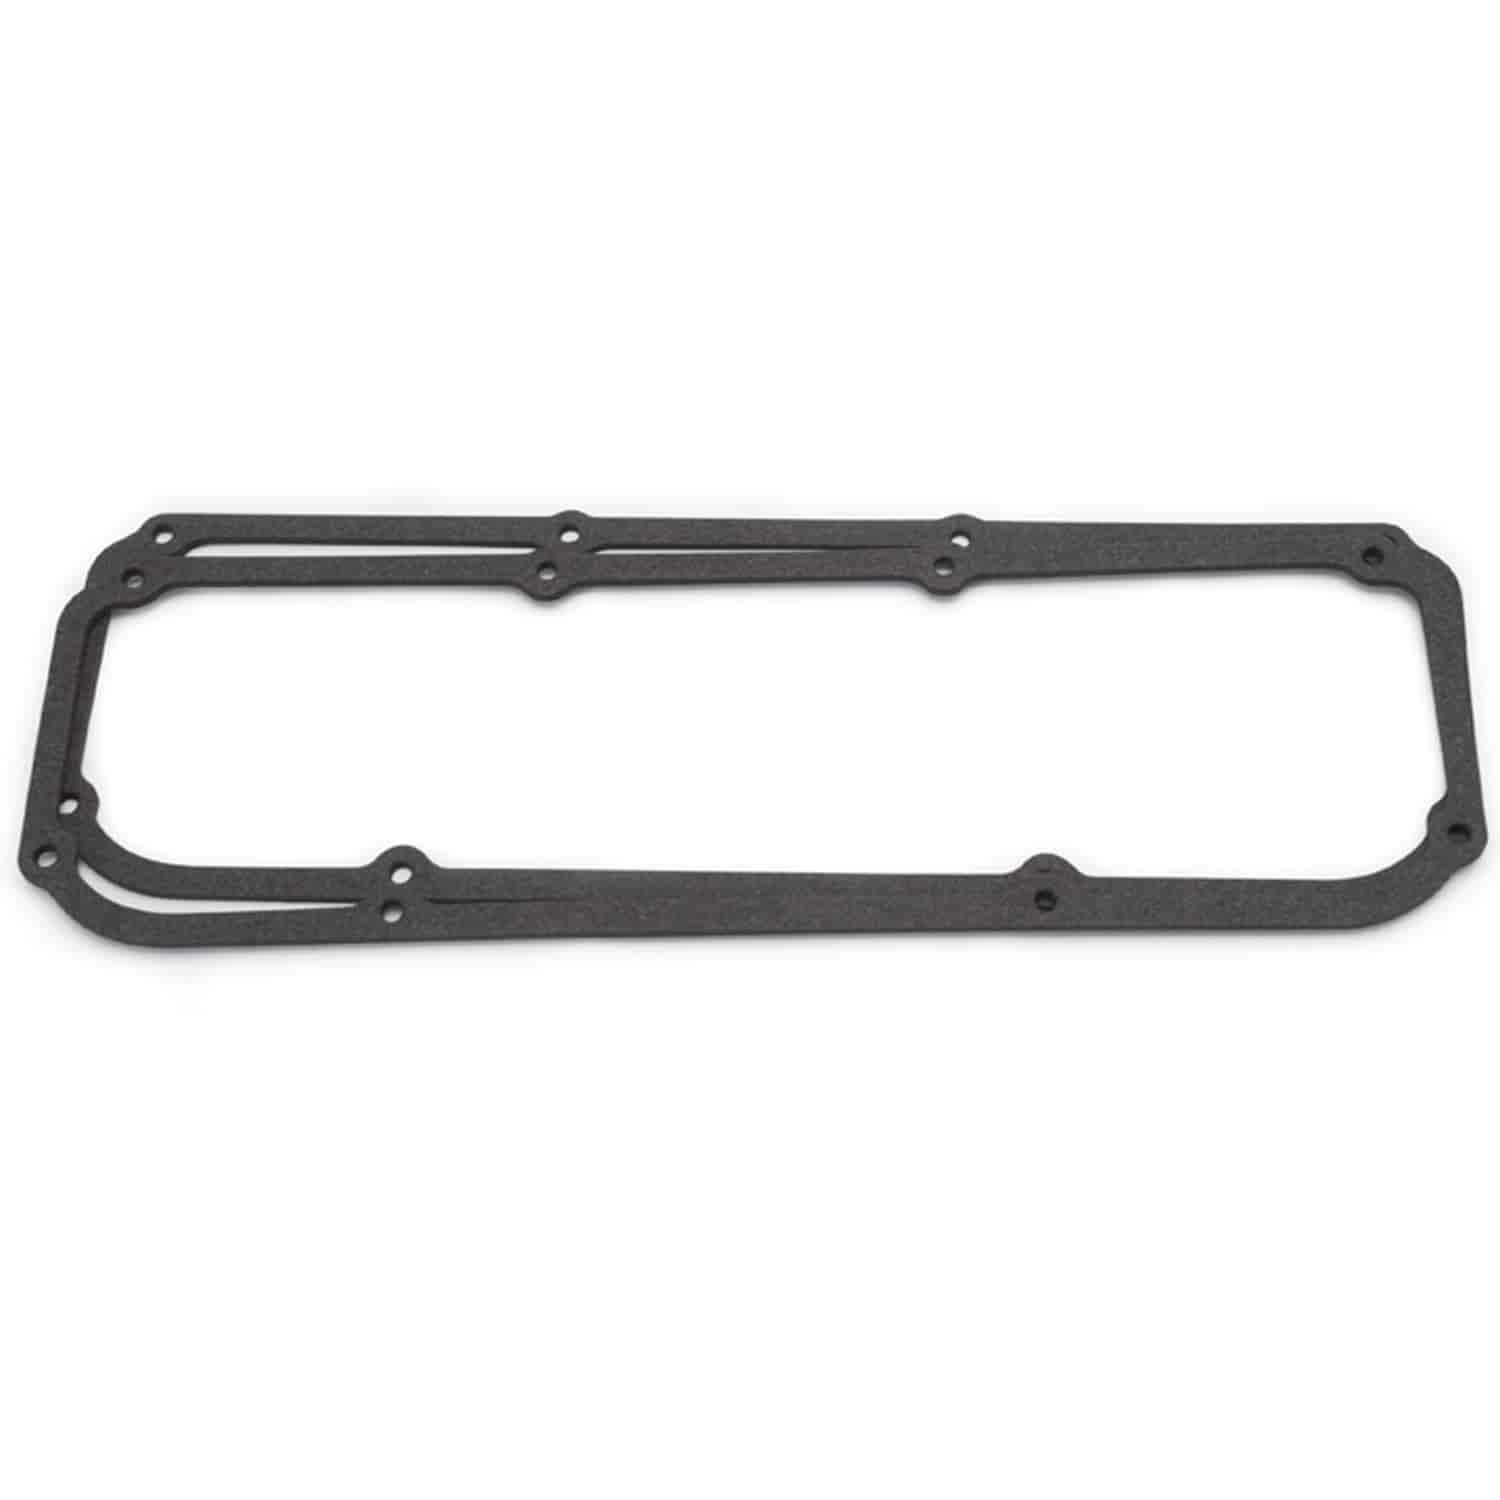 Valve Cover Gaskets for Ford 351C/351M/400M